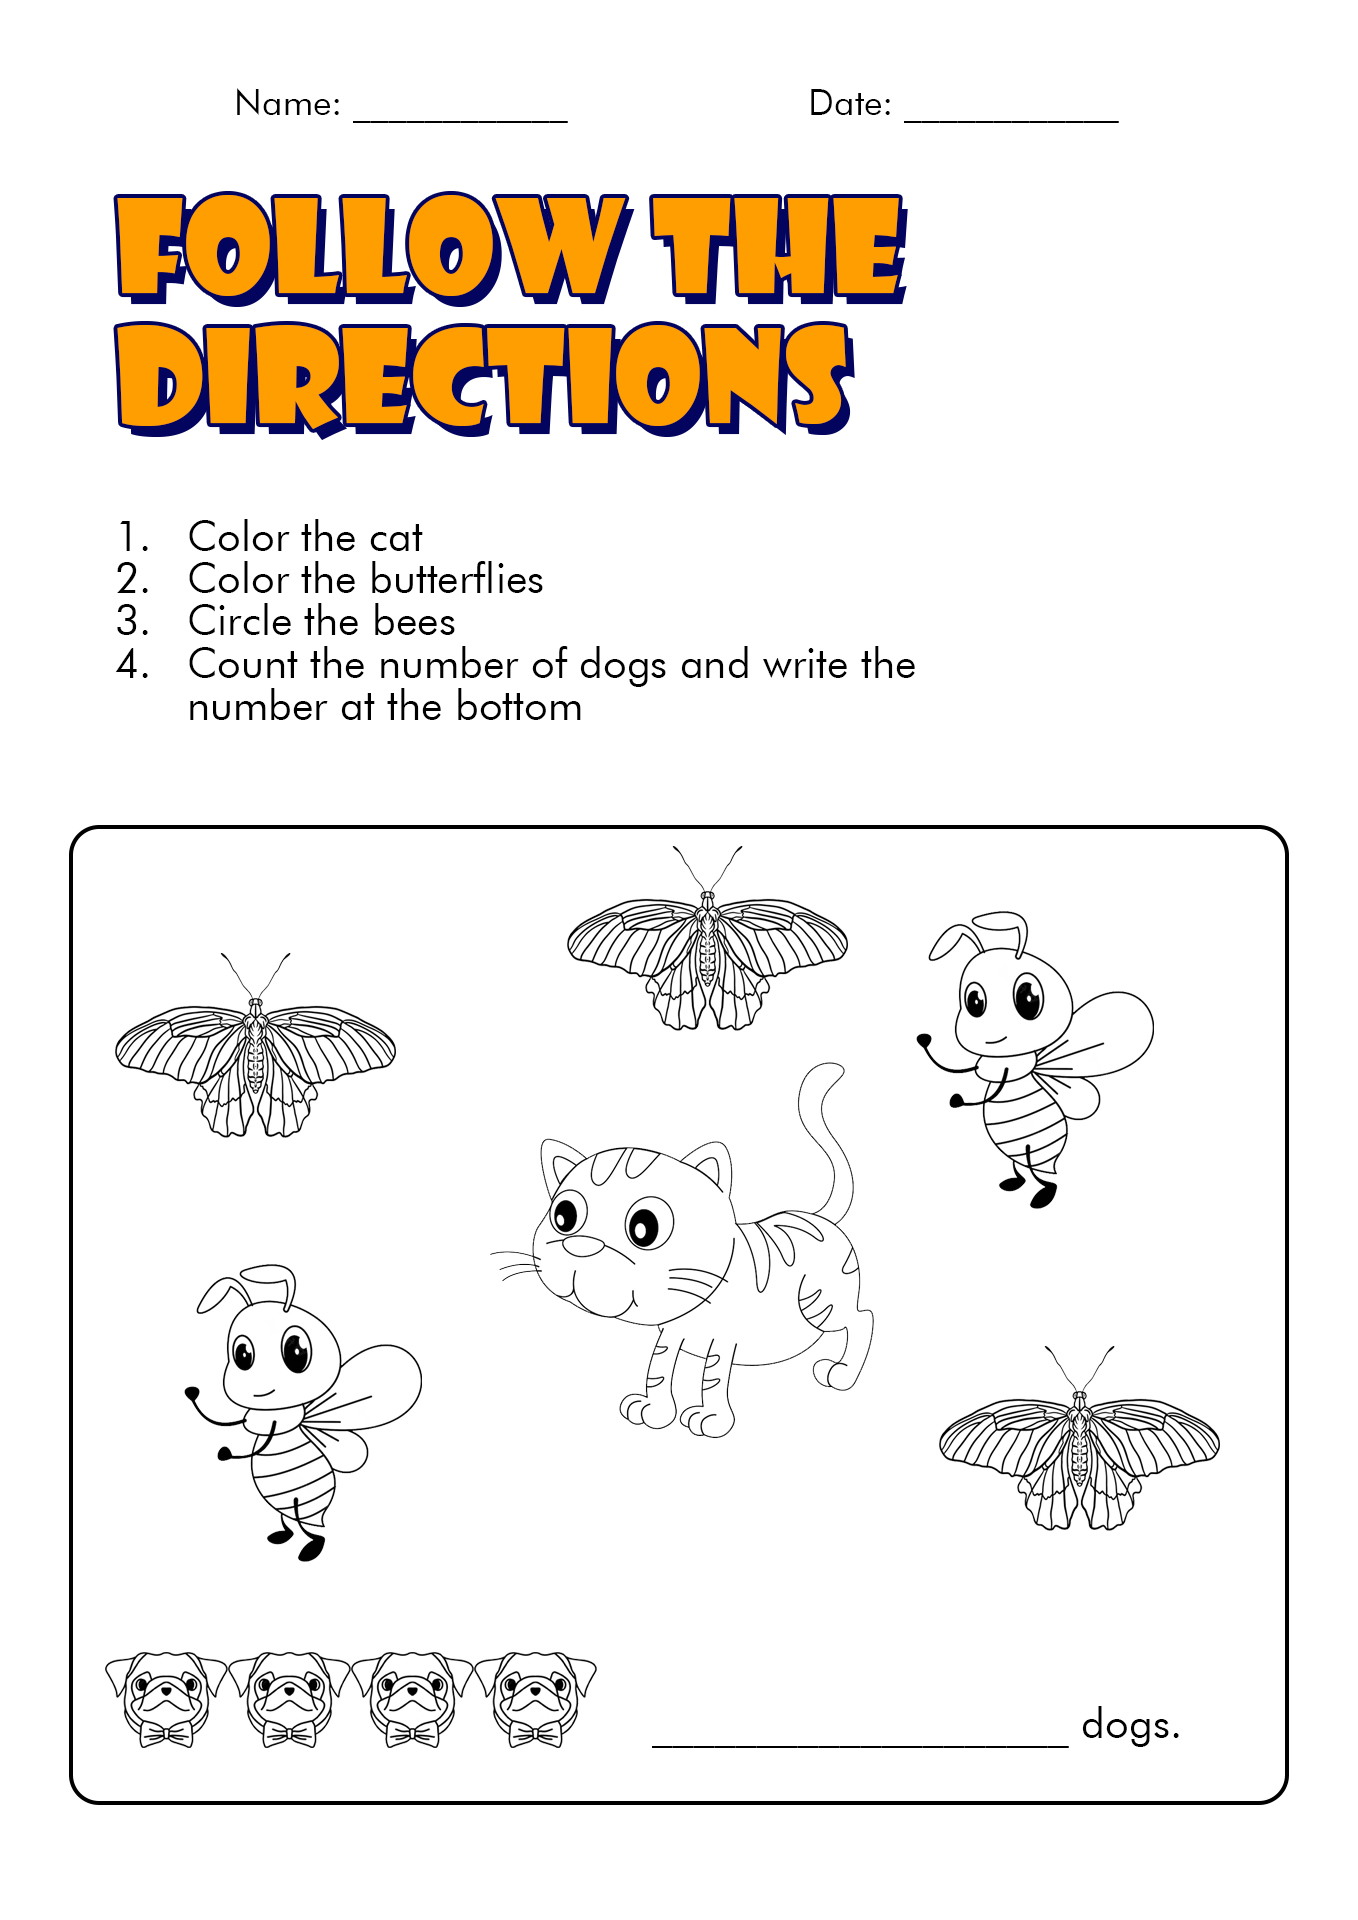 Free Following Directions Coloring Worksheets